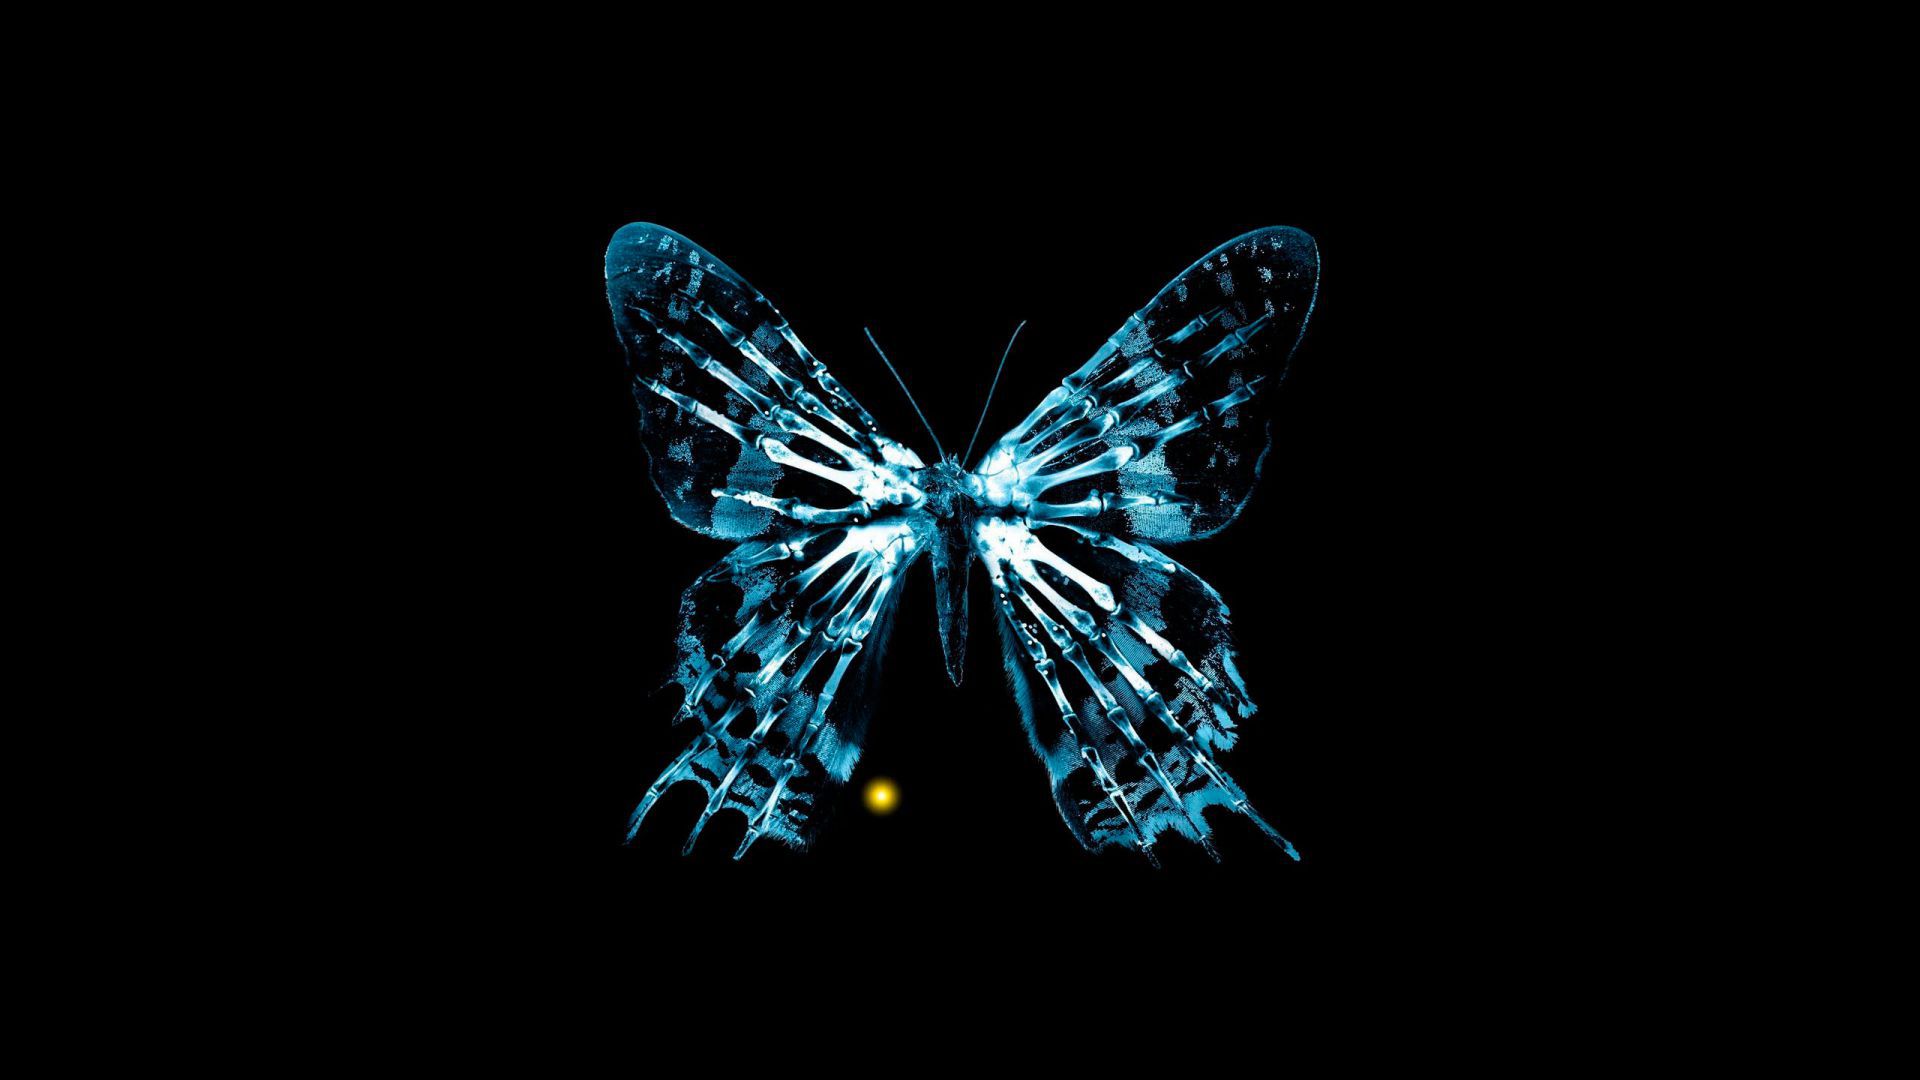 The Butterfly Effect wallpapers and images - wallpapers, pictures, photos